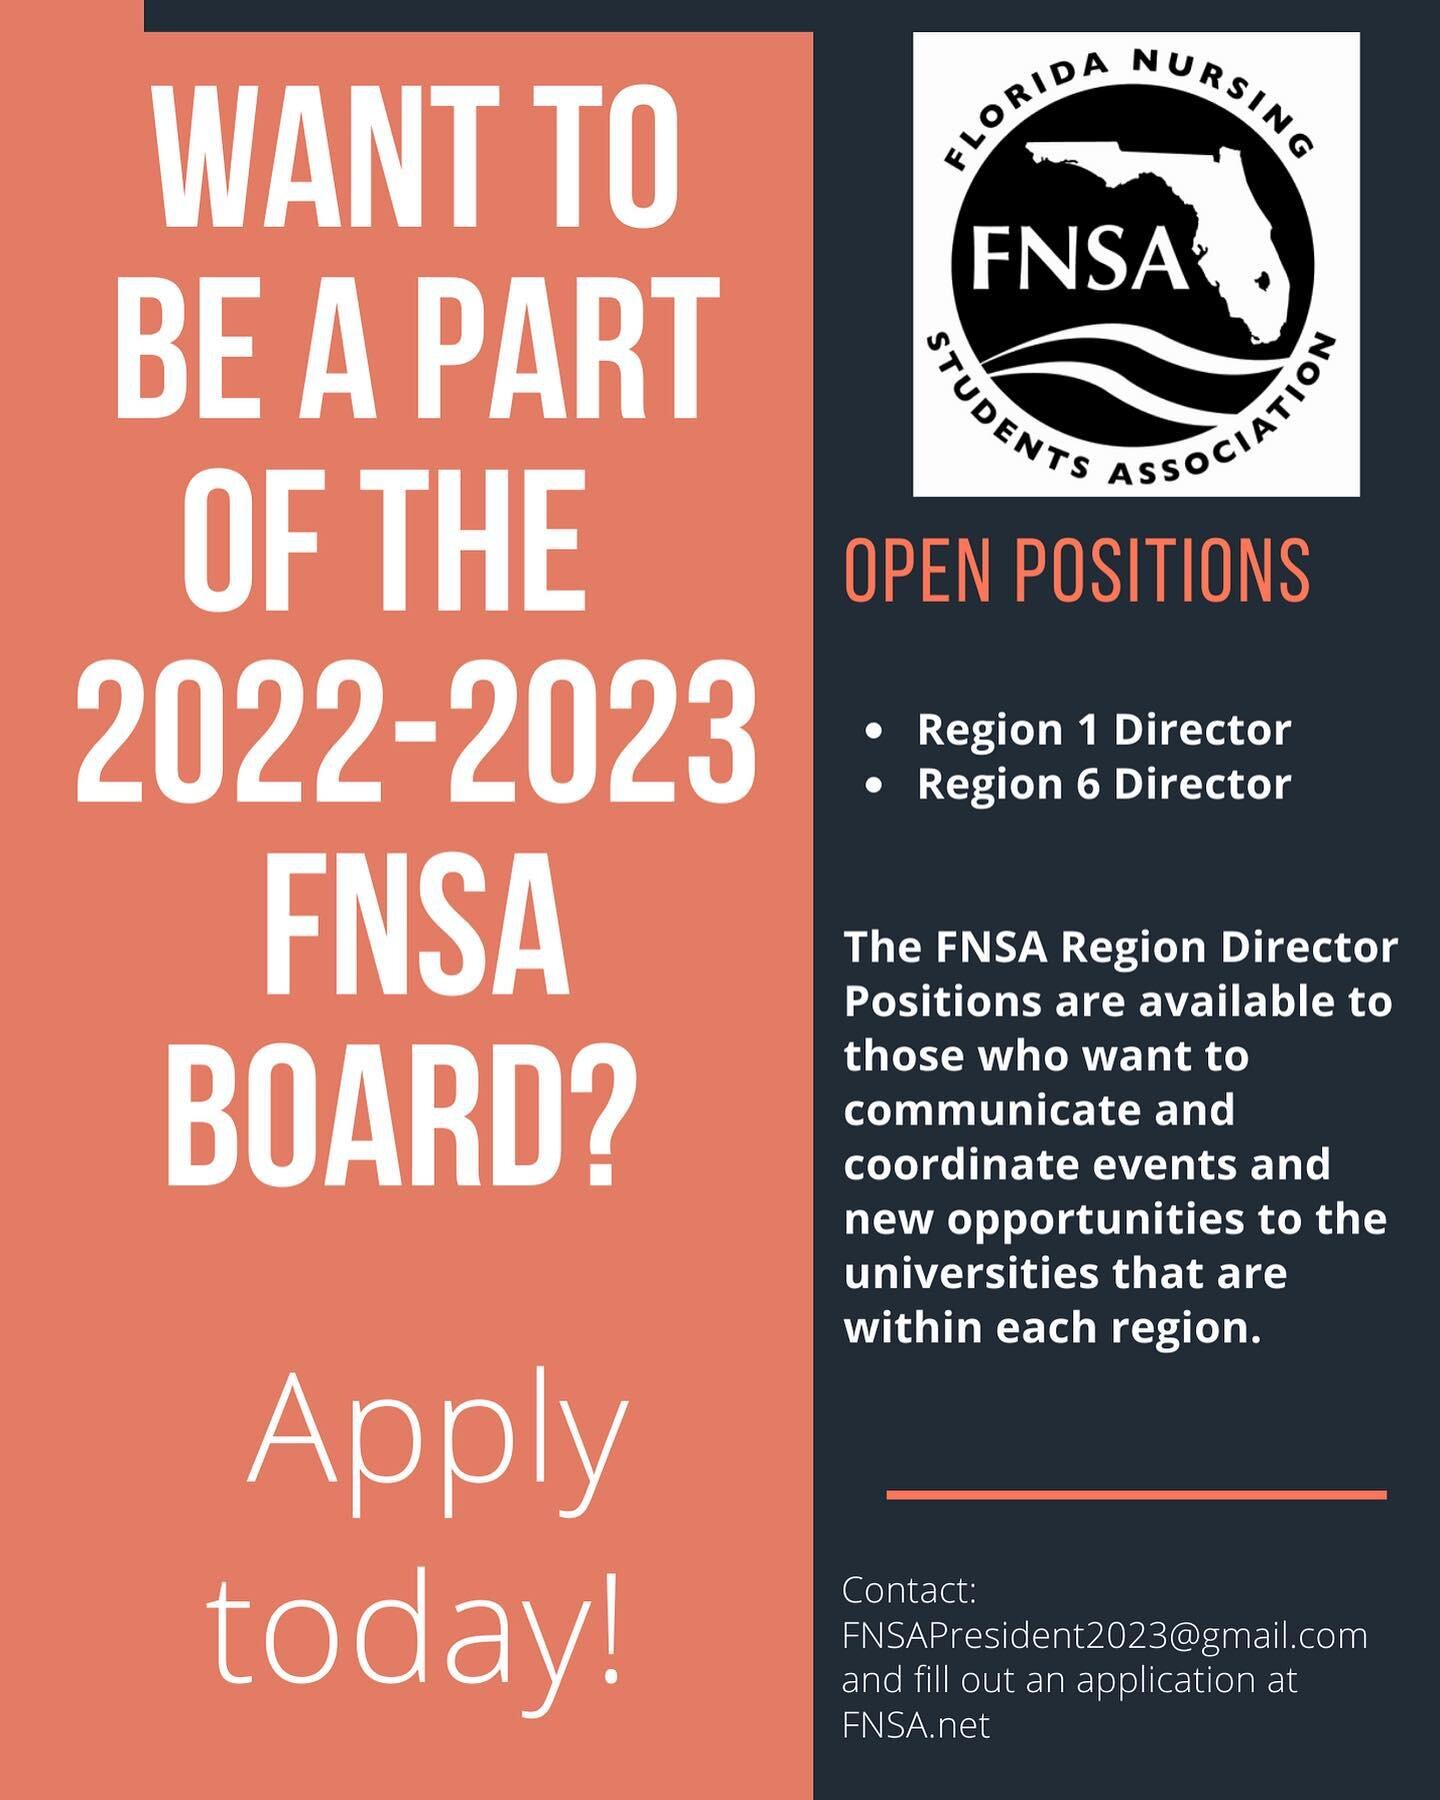 Interested in joining our 2022-2023 State board? We have 2 OPEN POSITIONS that are available to apply for TODAY! Contact our President at FNSApresident2023@gmail.com and fill out an application! Applications can be found at FNSA.net